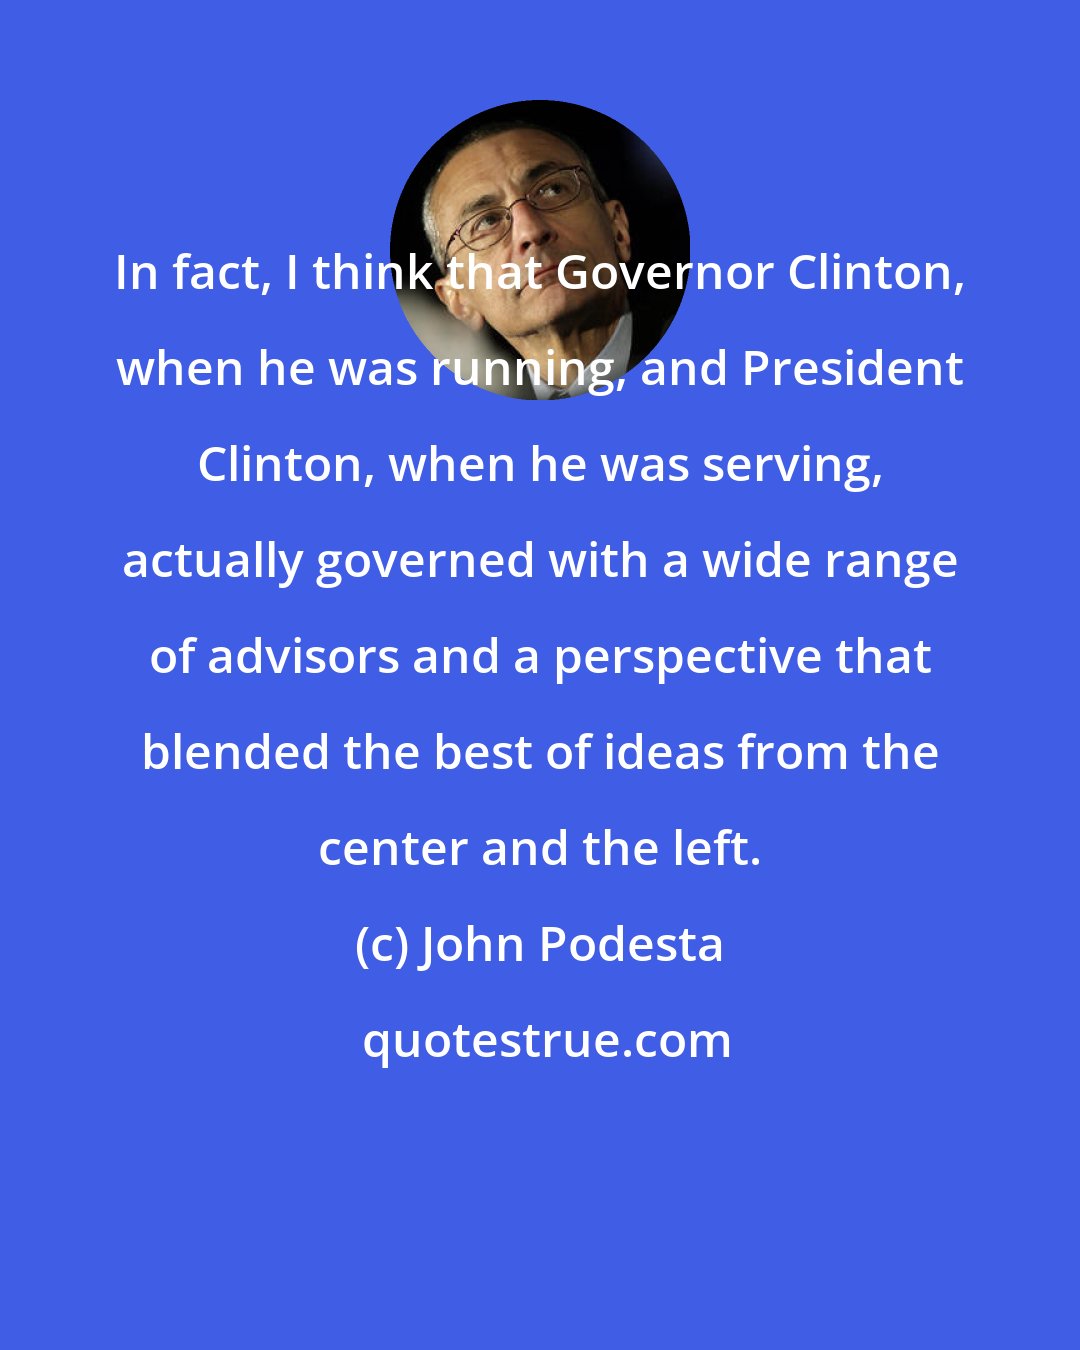 John Podesta: In fact, I think that Governor Clinton, when he was running, and President Clinton, when he was serving, actually governed with a wide range of advisors and a perspective that blended the best of ideas from the center and the left.